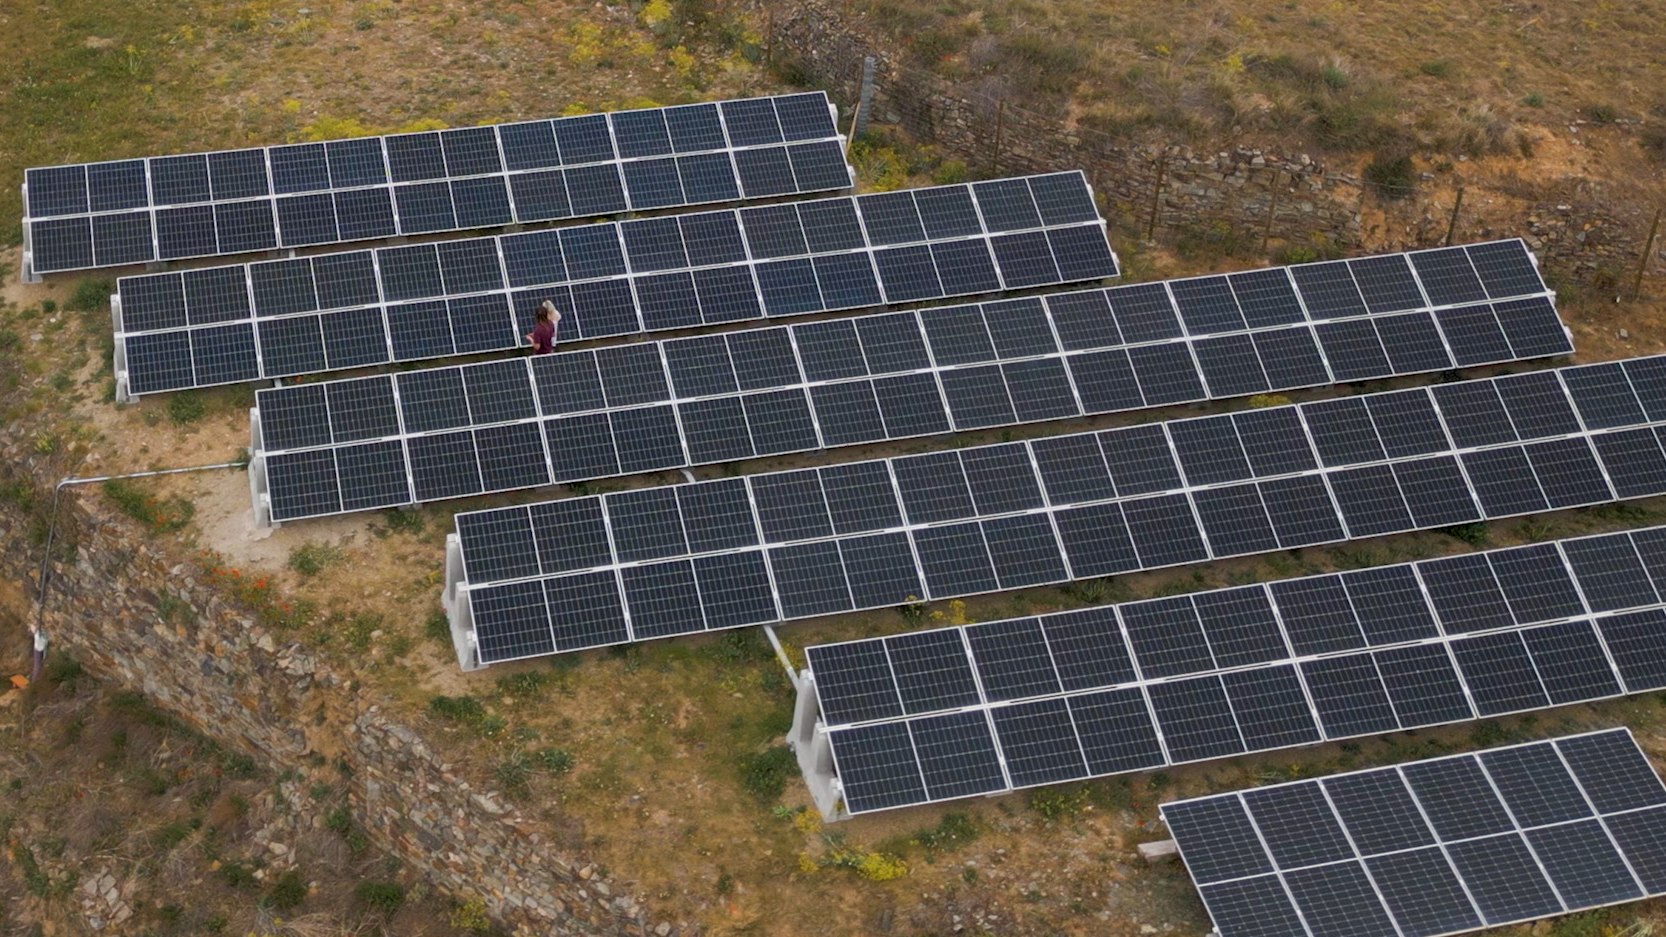 Chinese solar technology has helped Spain's small village of Luco de Jiloca to be self-sufficient in energy. /CGTN